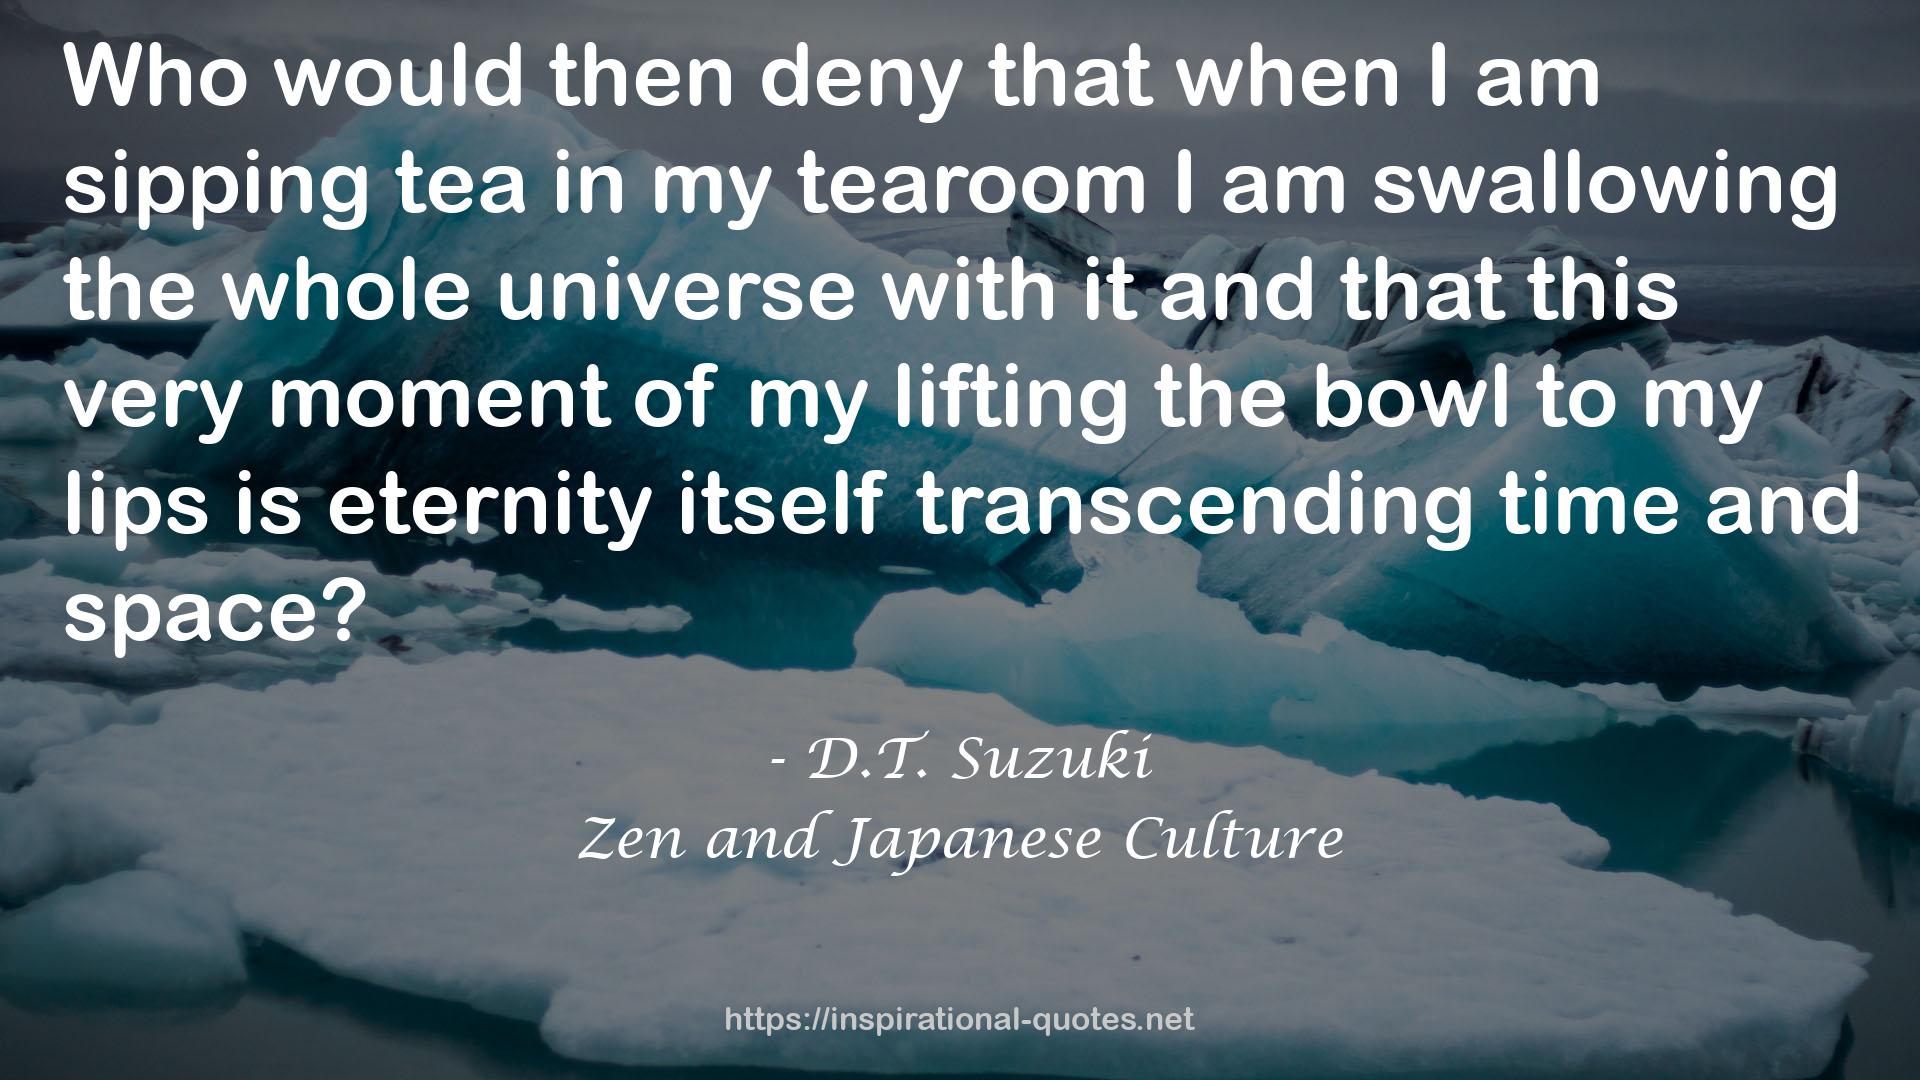 Zen and Japanese Culture QUOTES